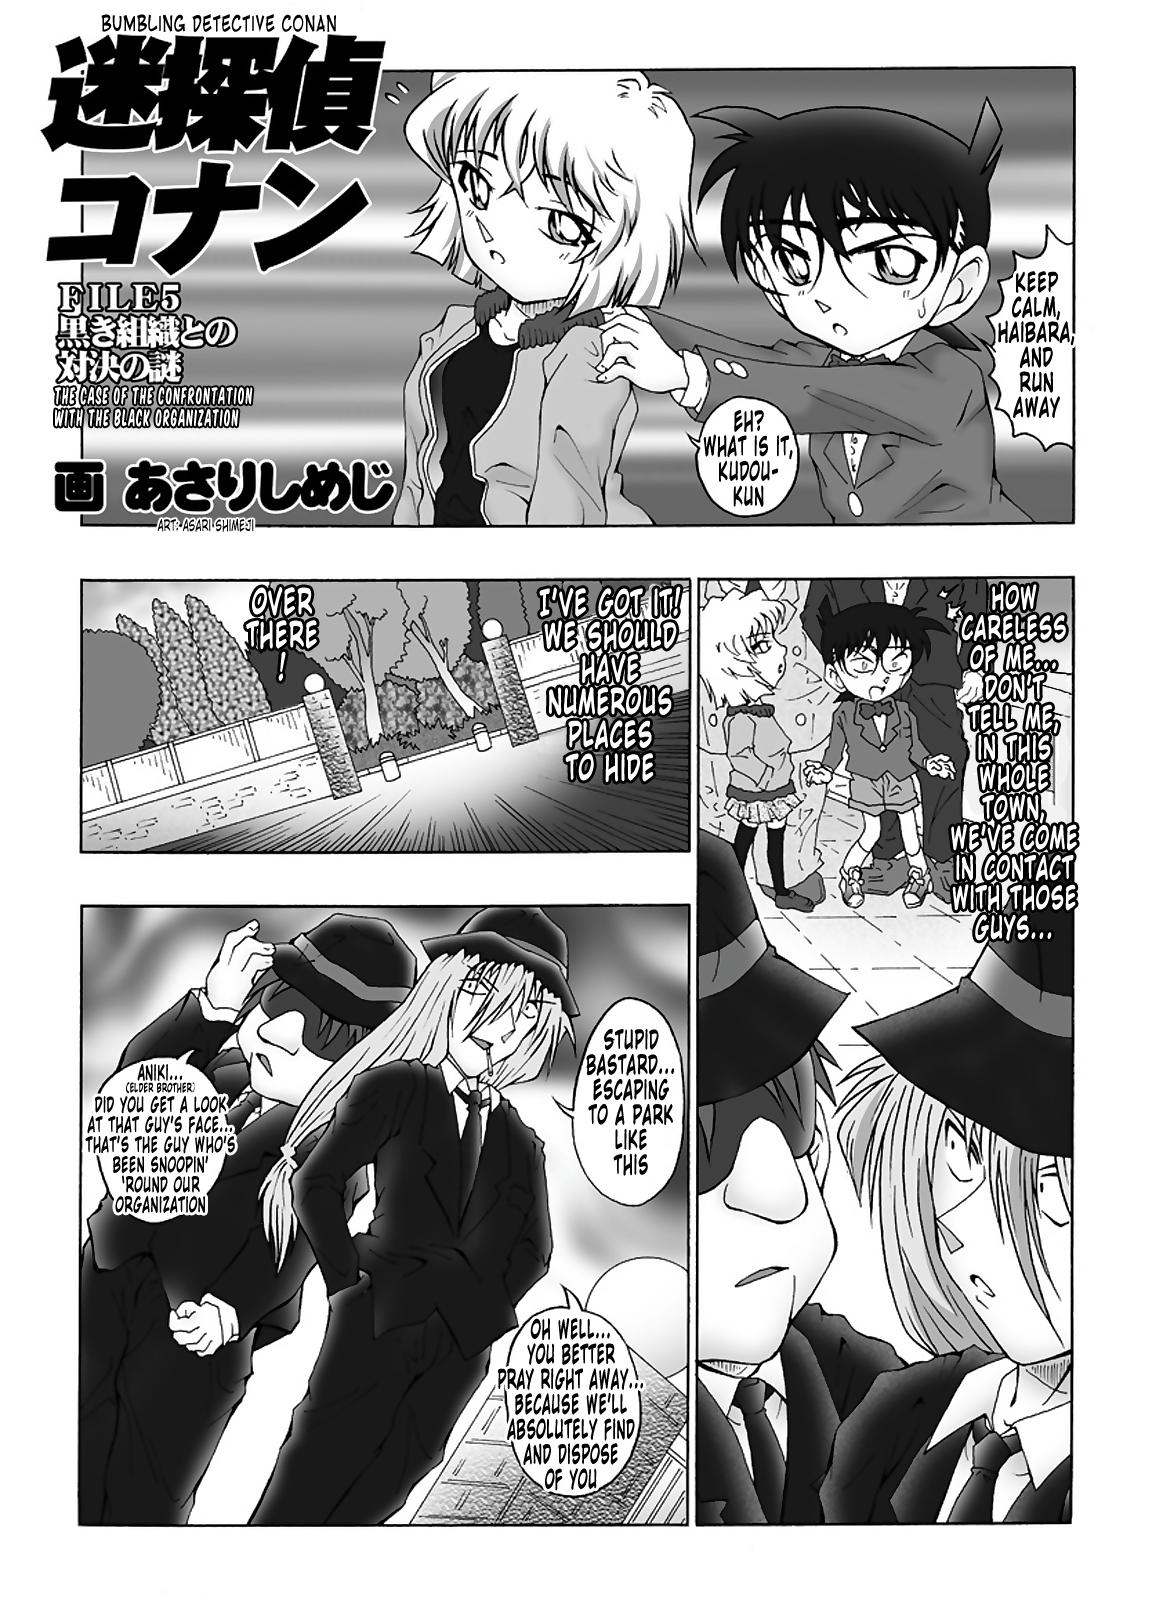 Bumbling Detective Conan - File 5: The Case of The Confrontation with The Black Organiztion 3